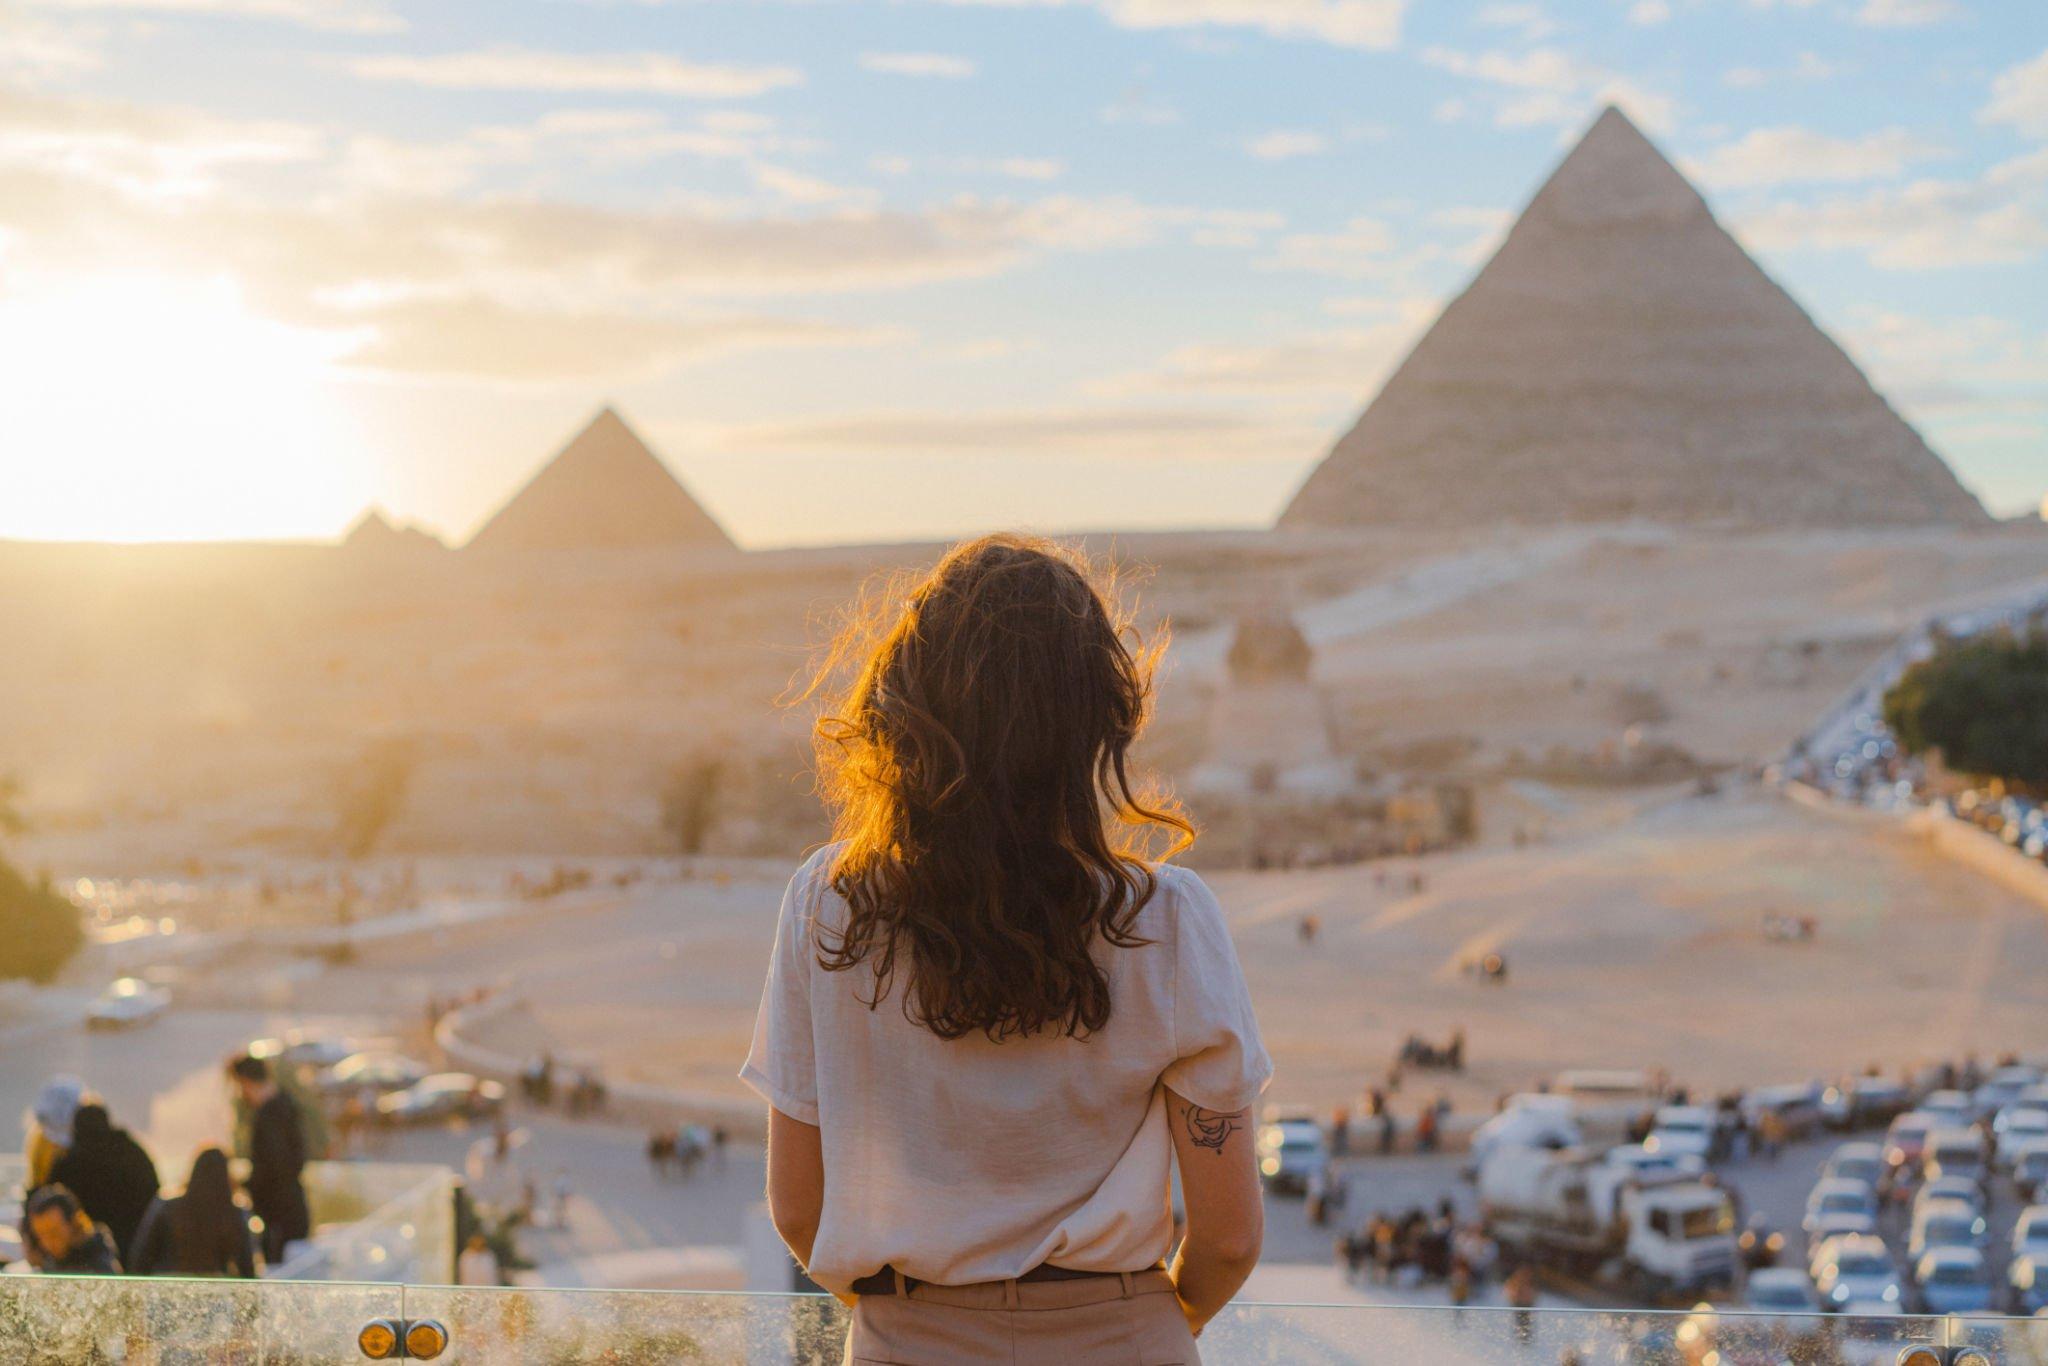 EgyptAir Announces Free Egypt Entry Visa Up to 96 Hours